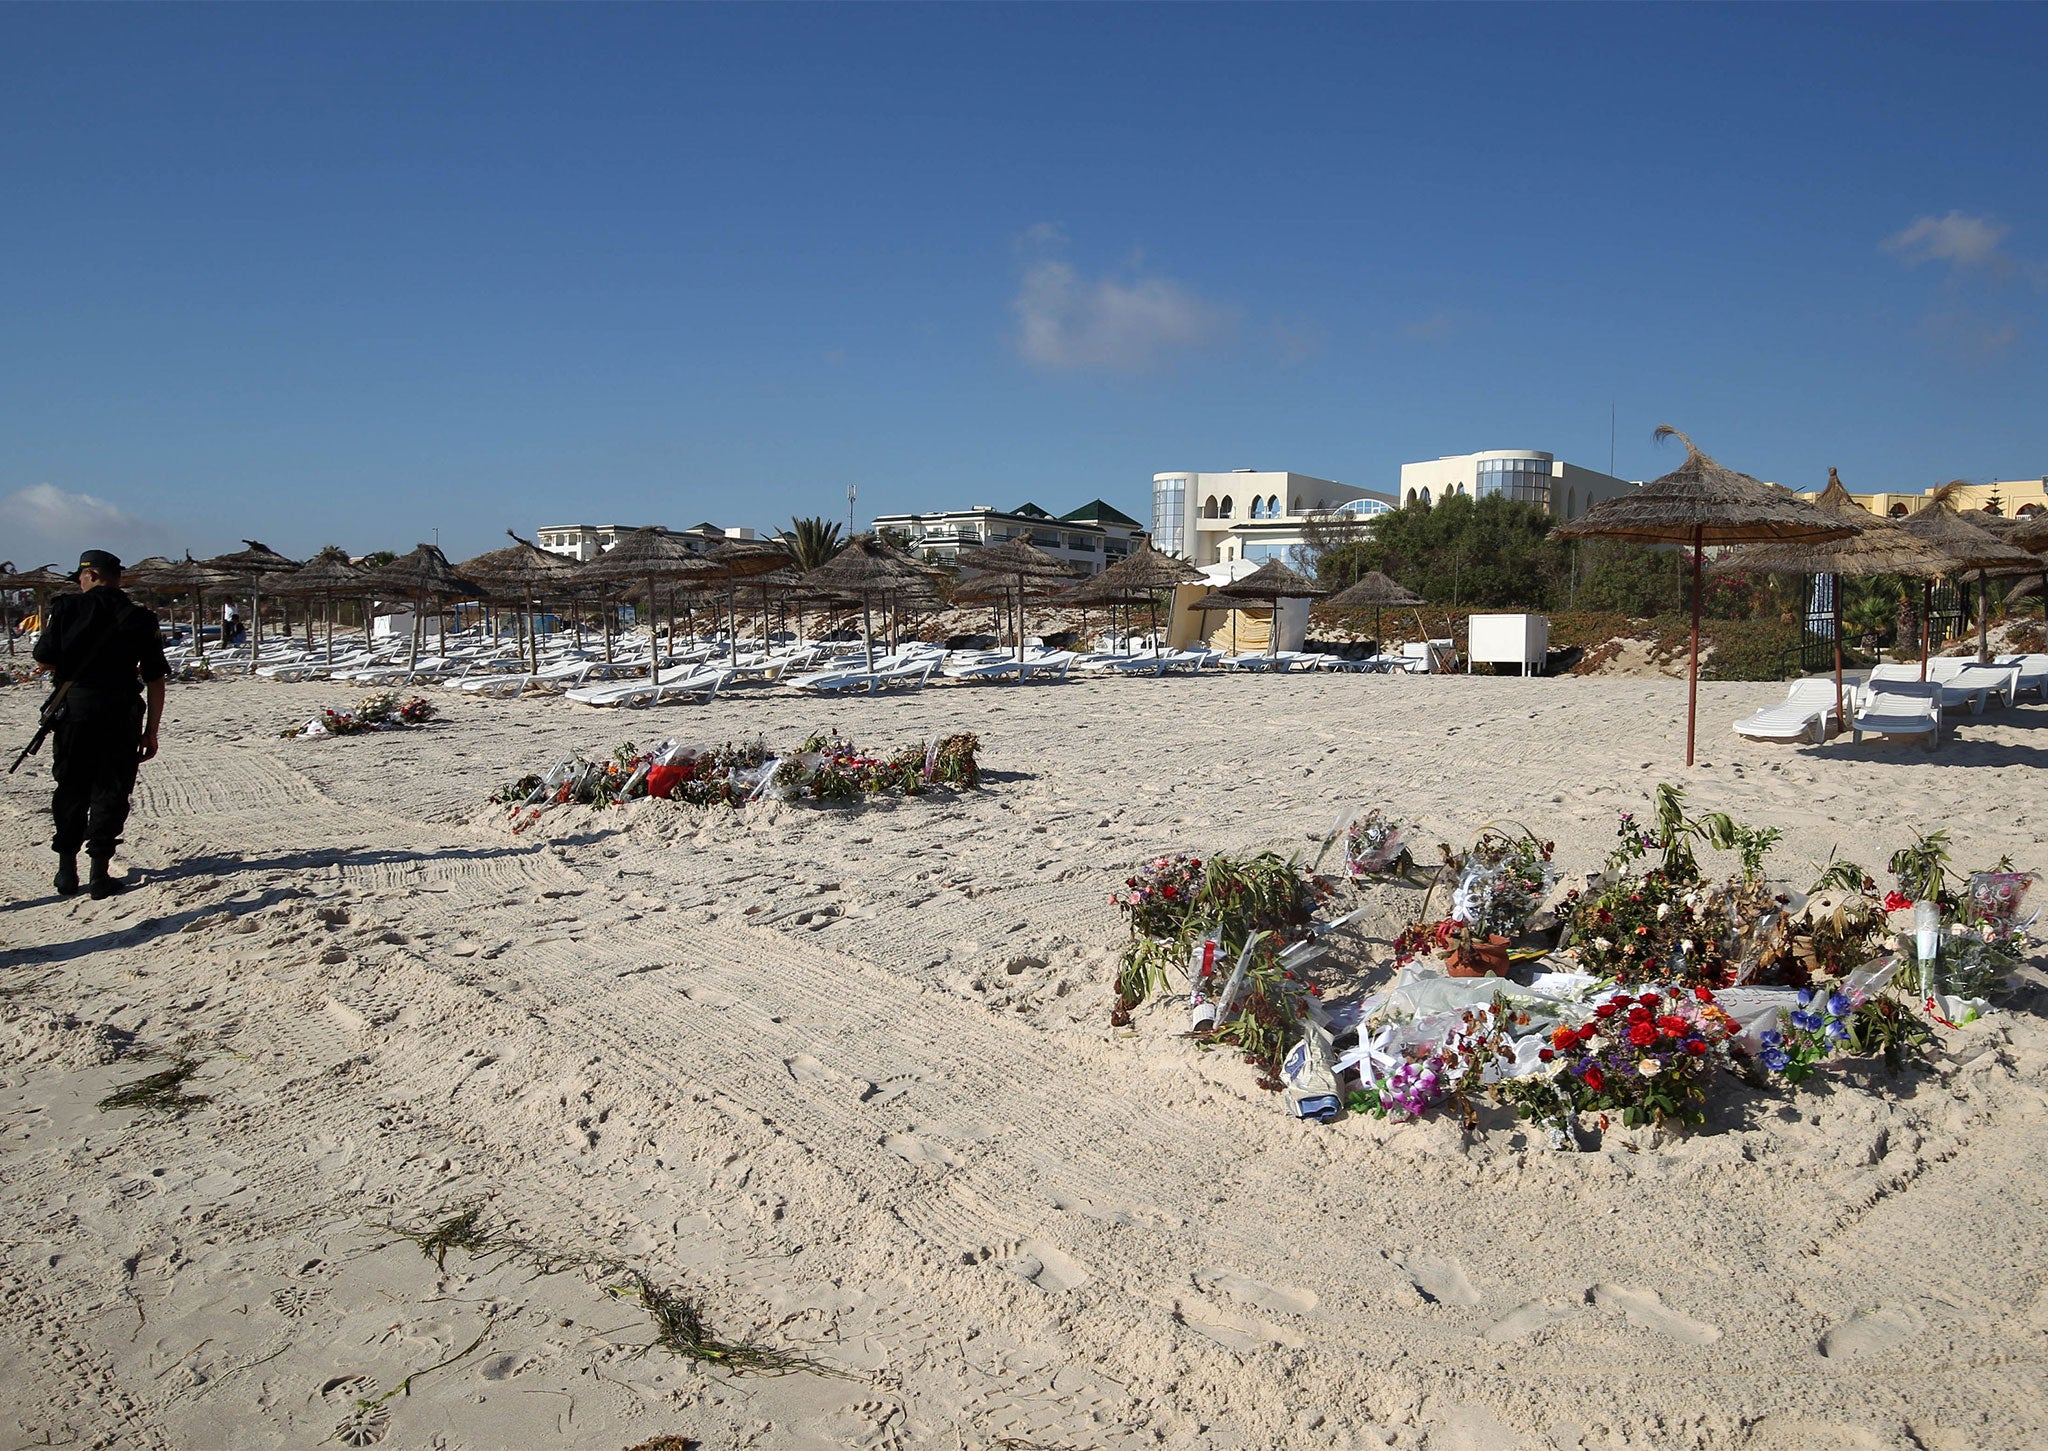 The attack in Tunisia killed 38 tourists, including 30 Britons